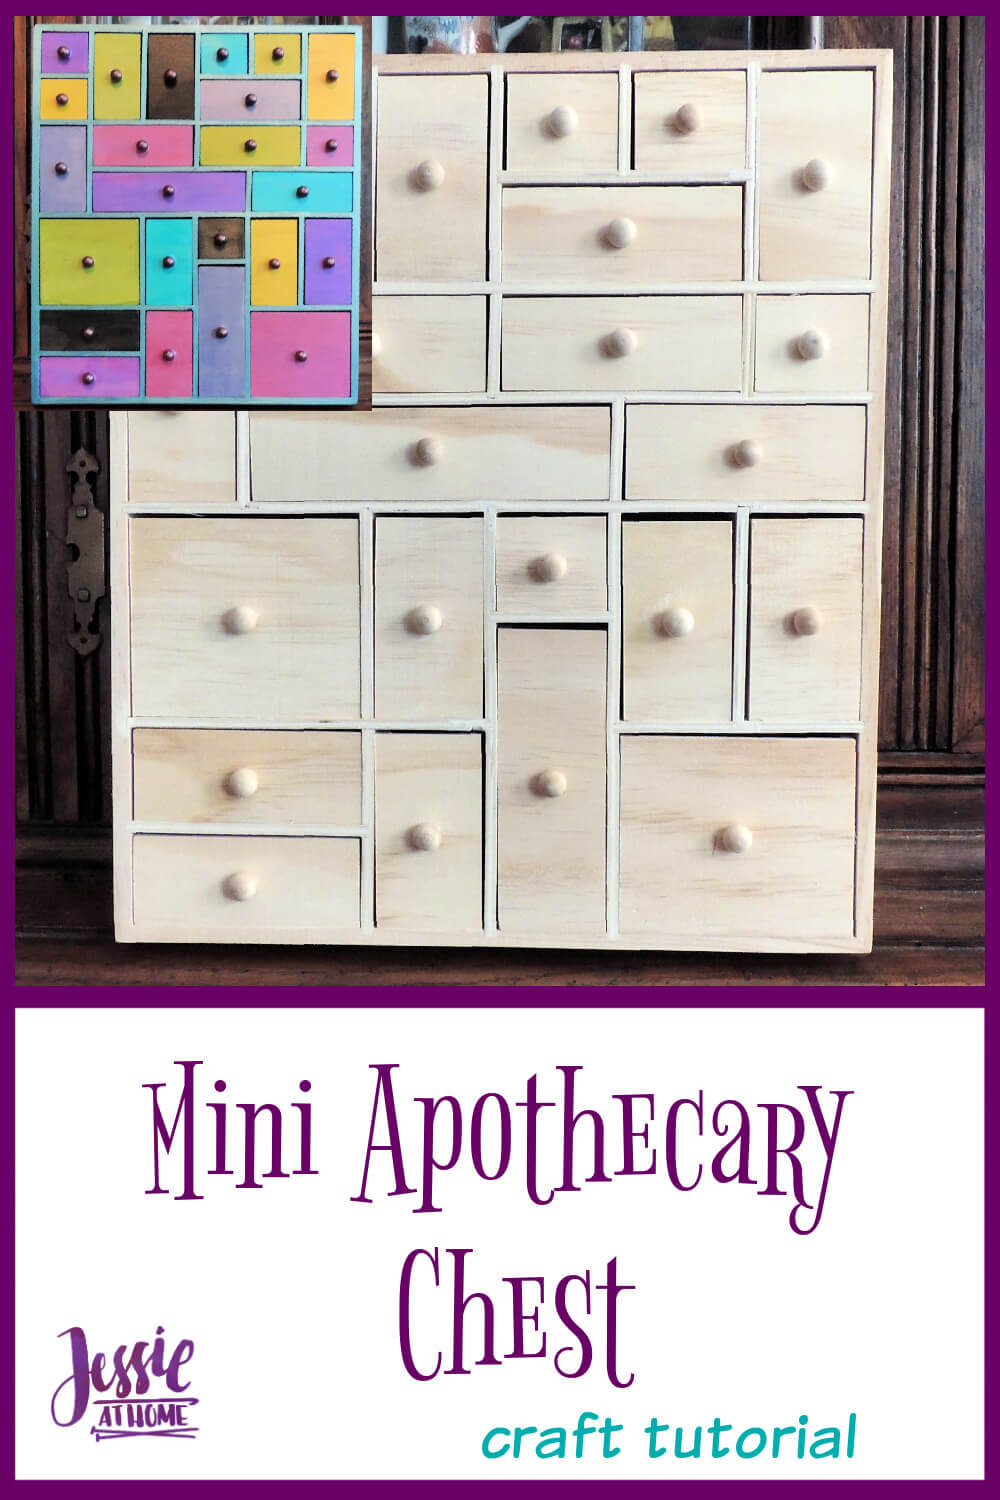 Mini Apothecary Chest - keep your knick-knacks organized in a pretty way